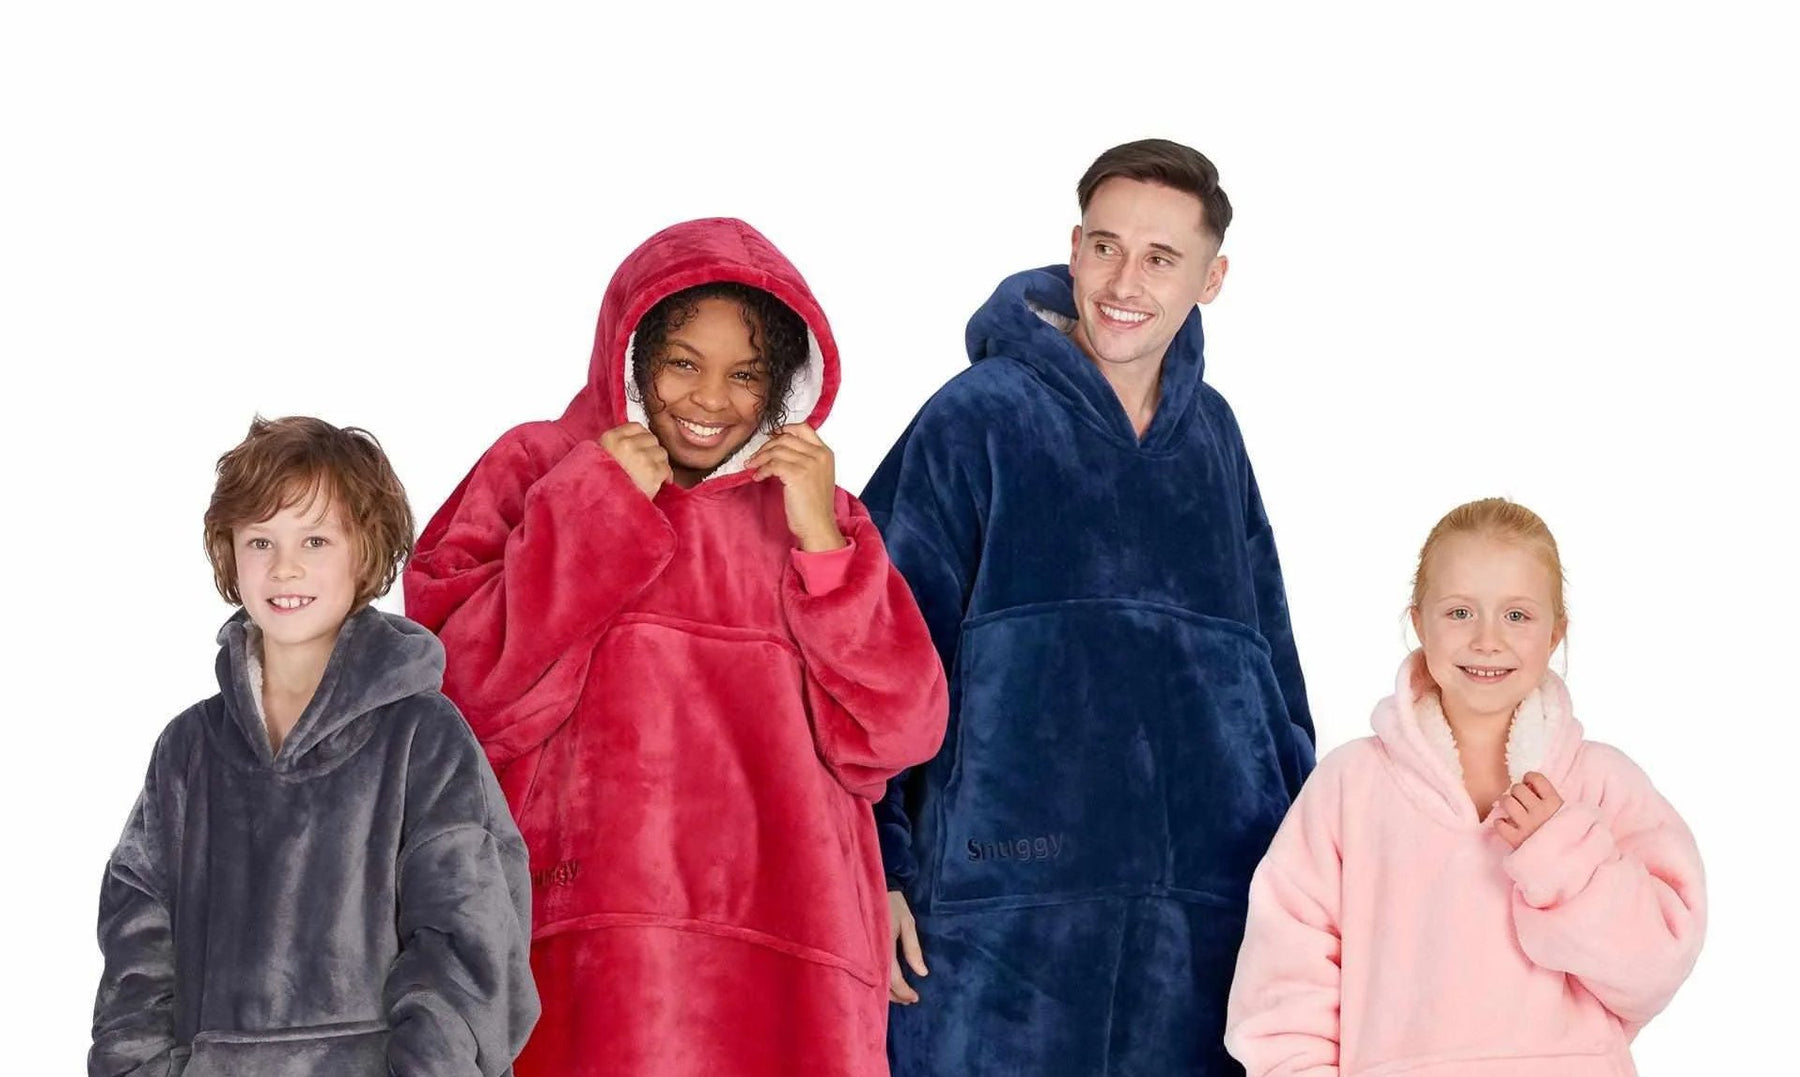 A Snuggy For Every Personality - Snuggy